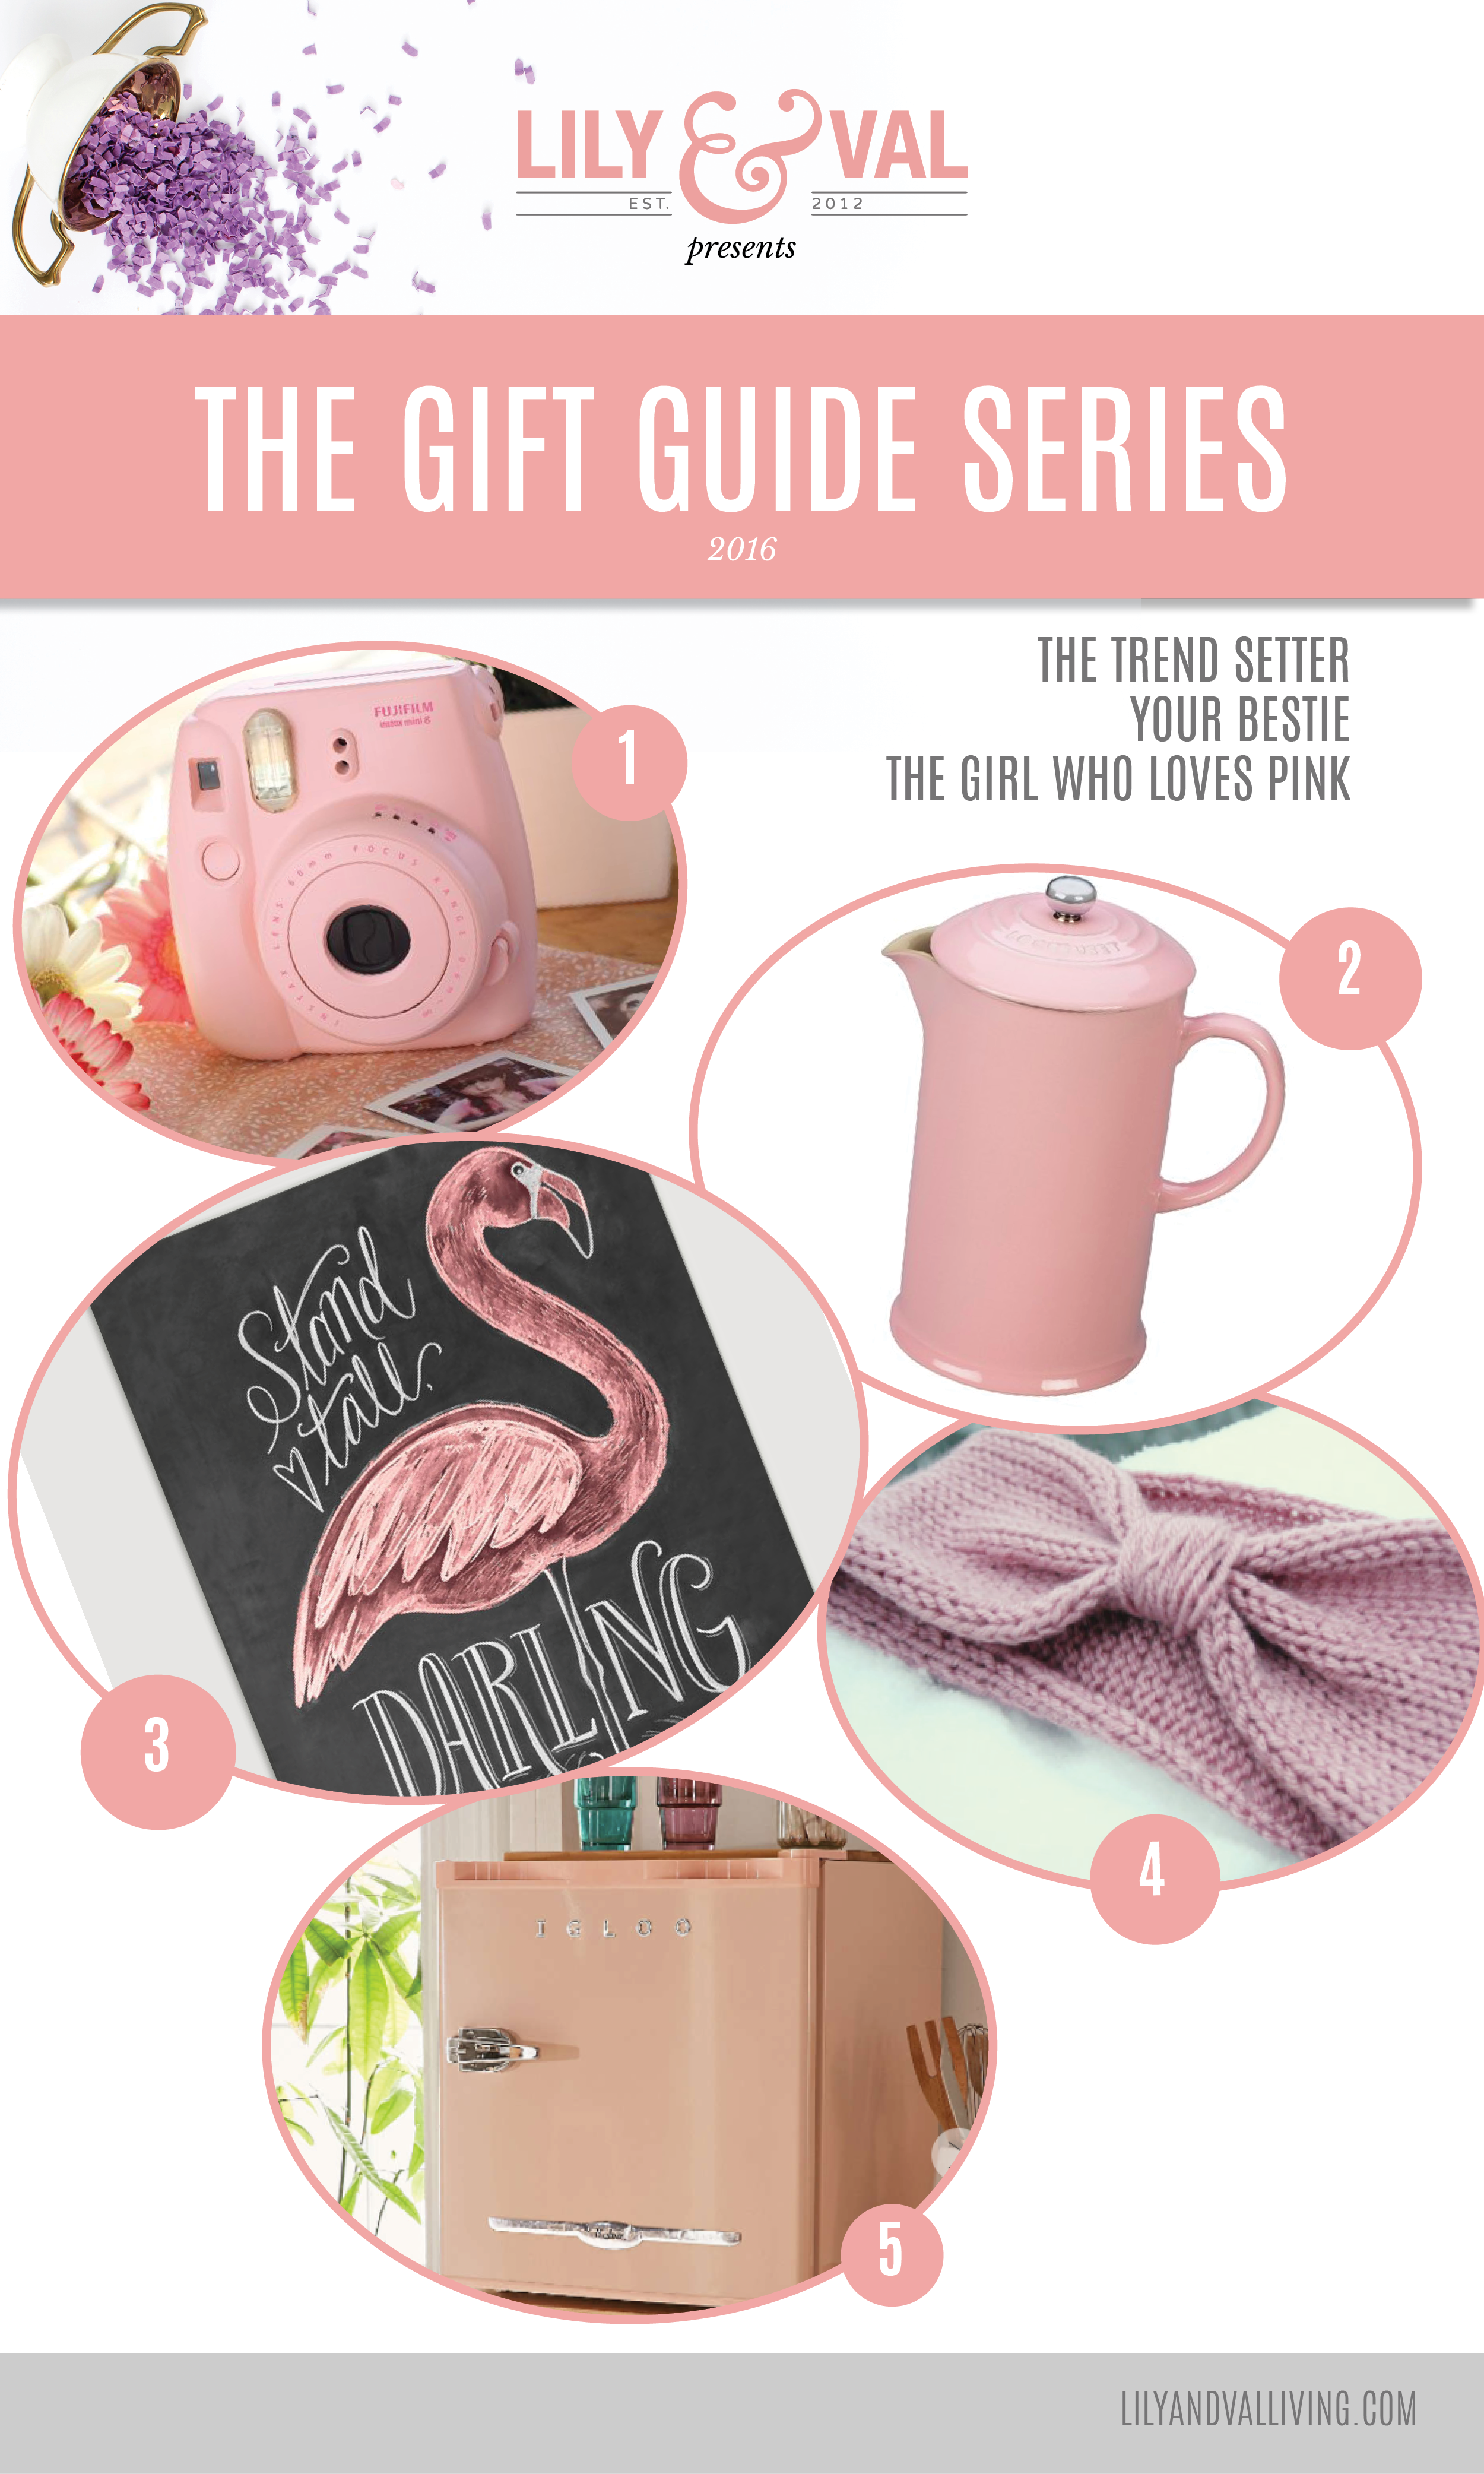 The Lily & Val Gift Guide Series. Gift guides for the trend setter, your bestie, the girl who loves pink